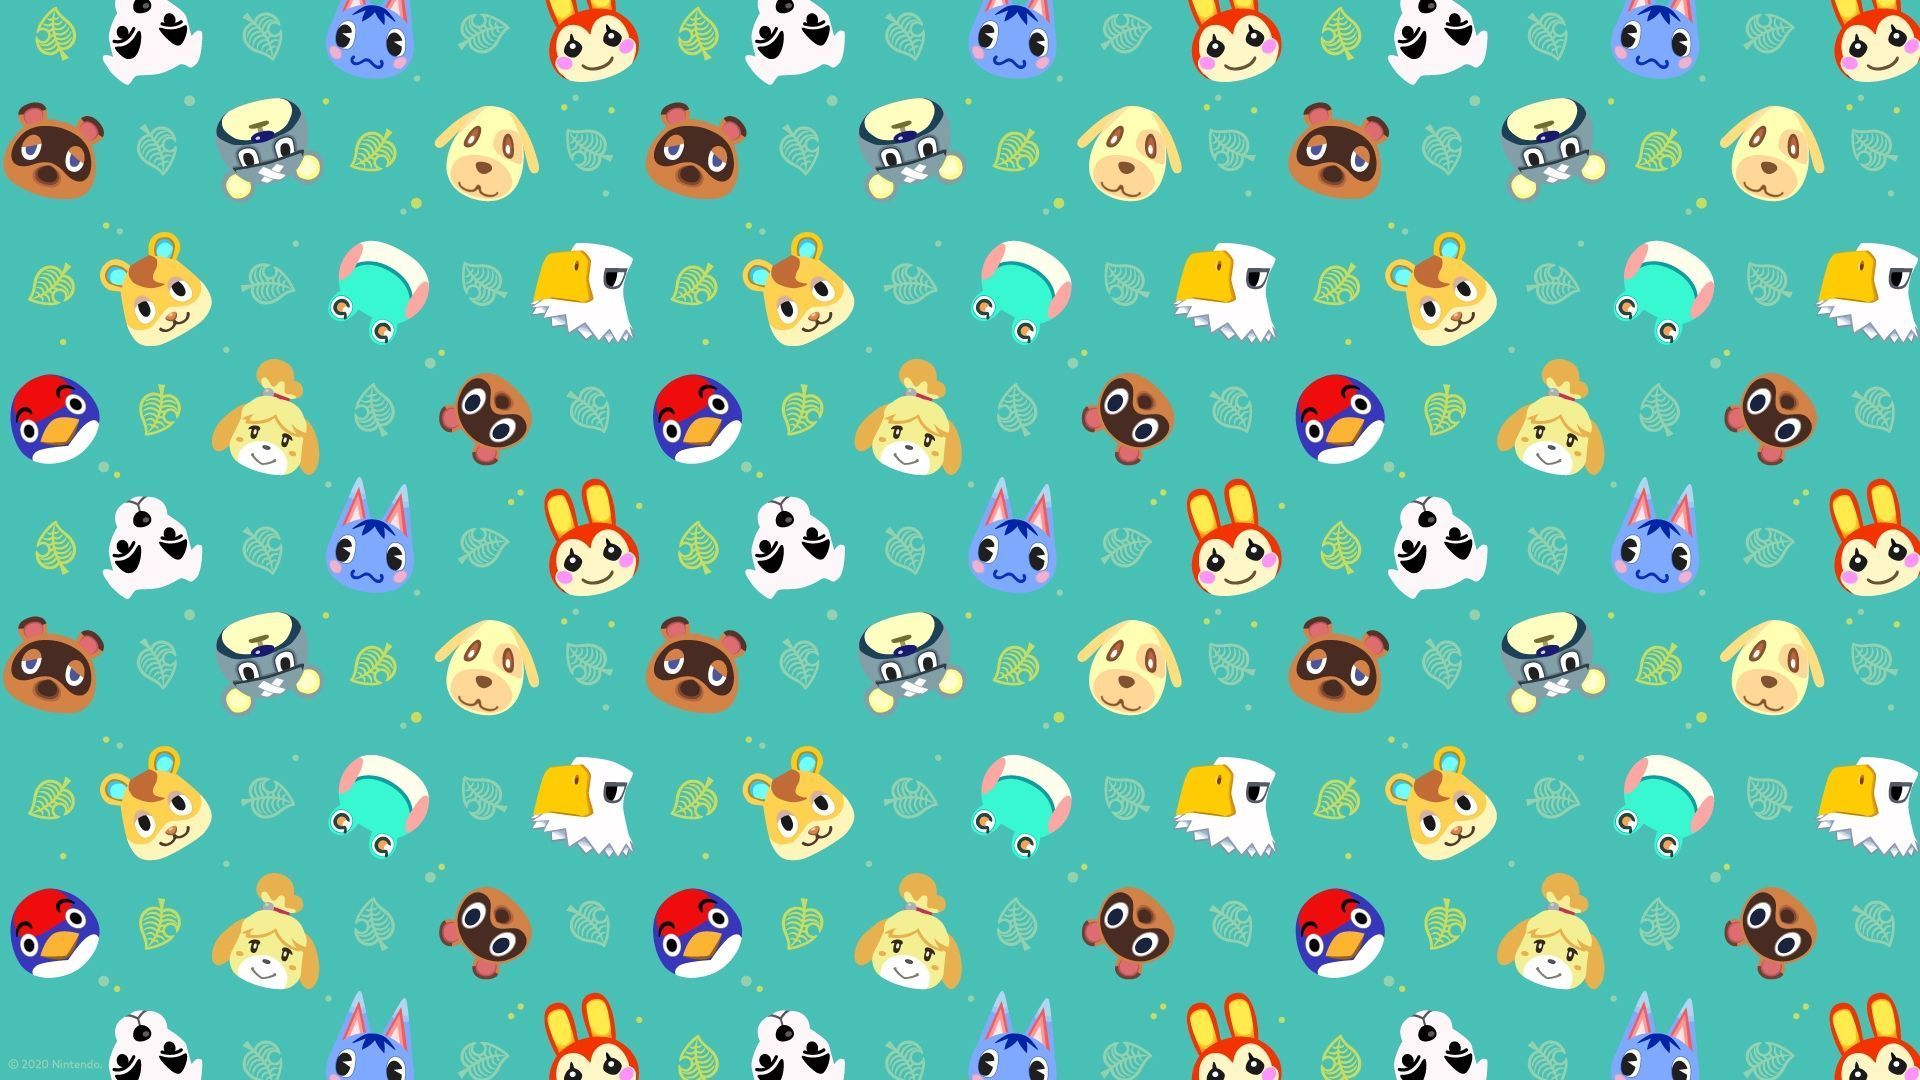 A pattern of animal faces on blue background - Animal Crossing, Nintendo